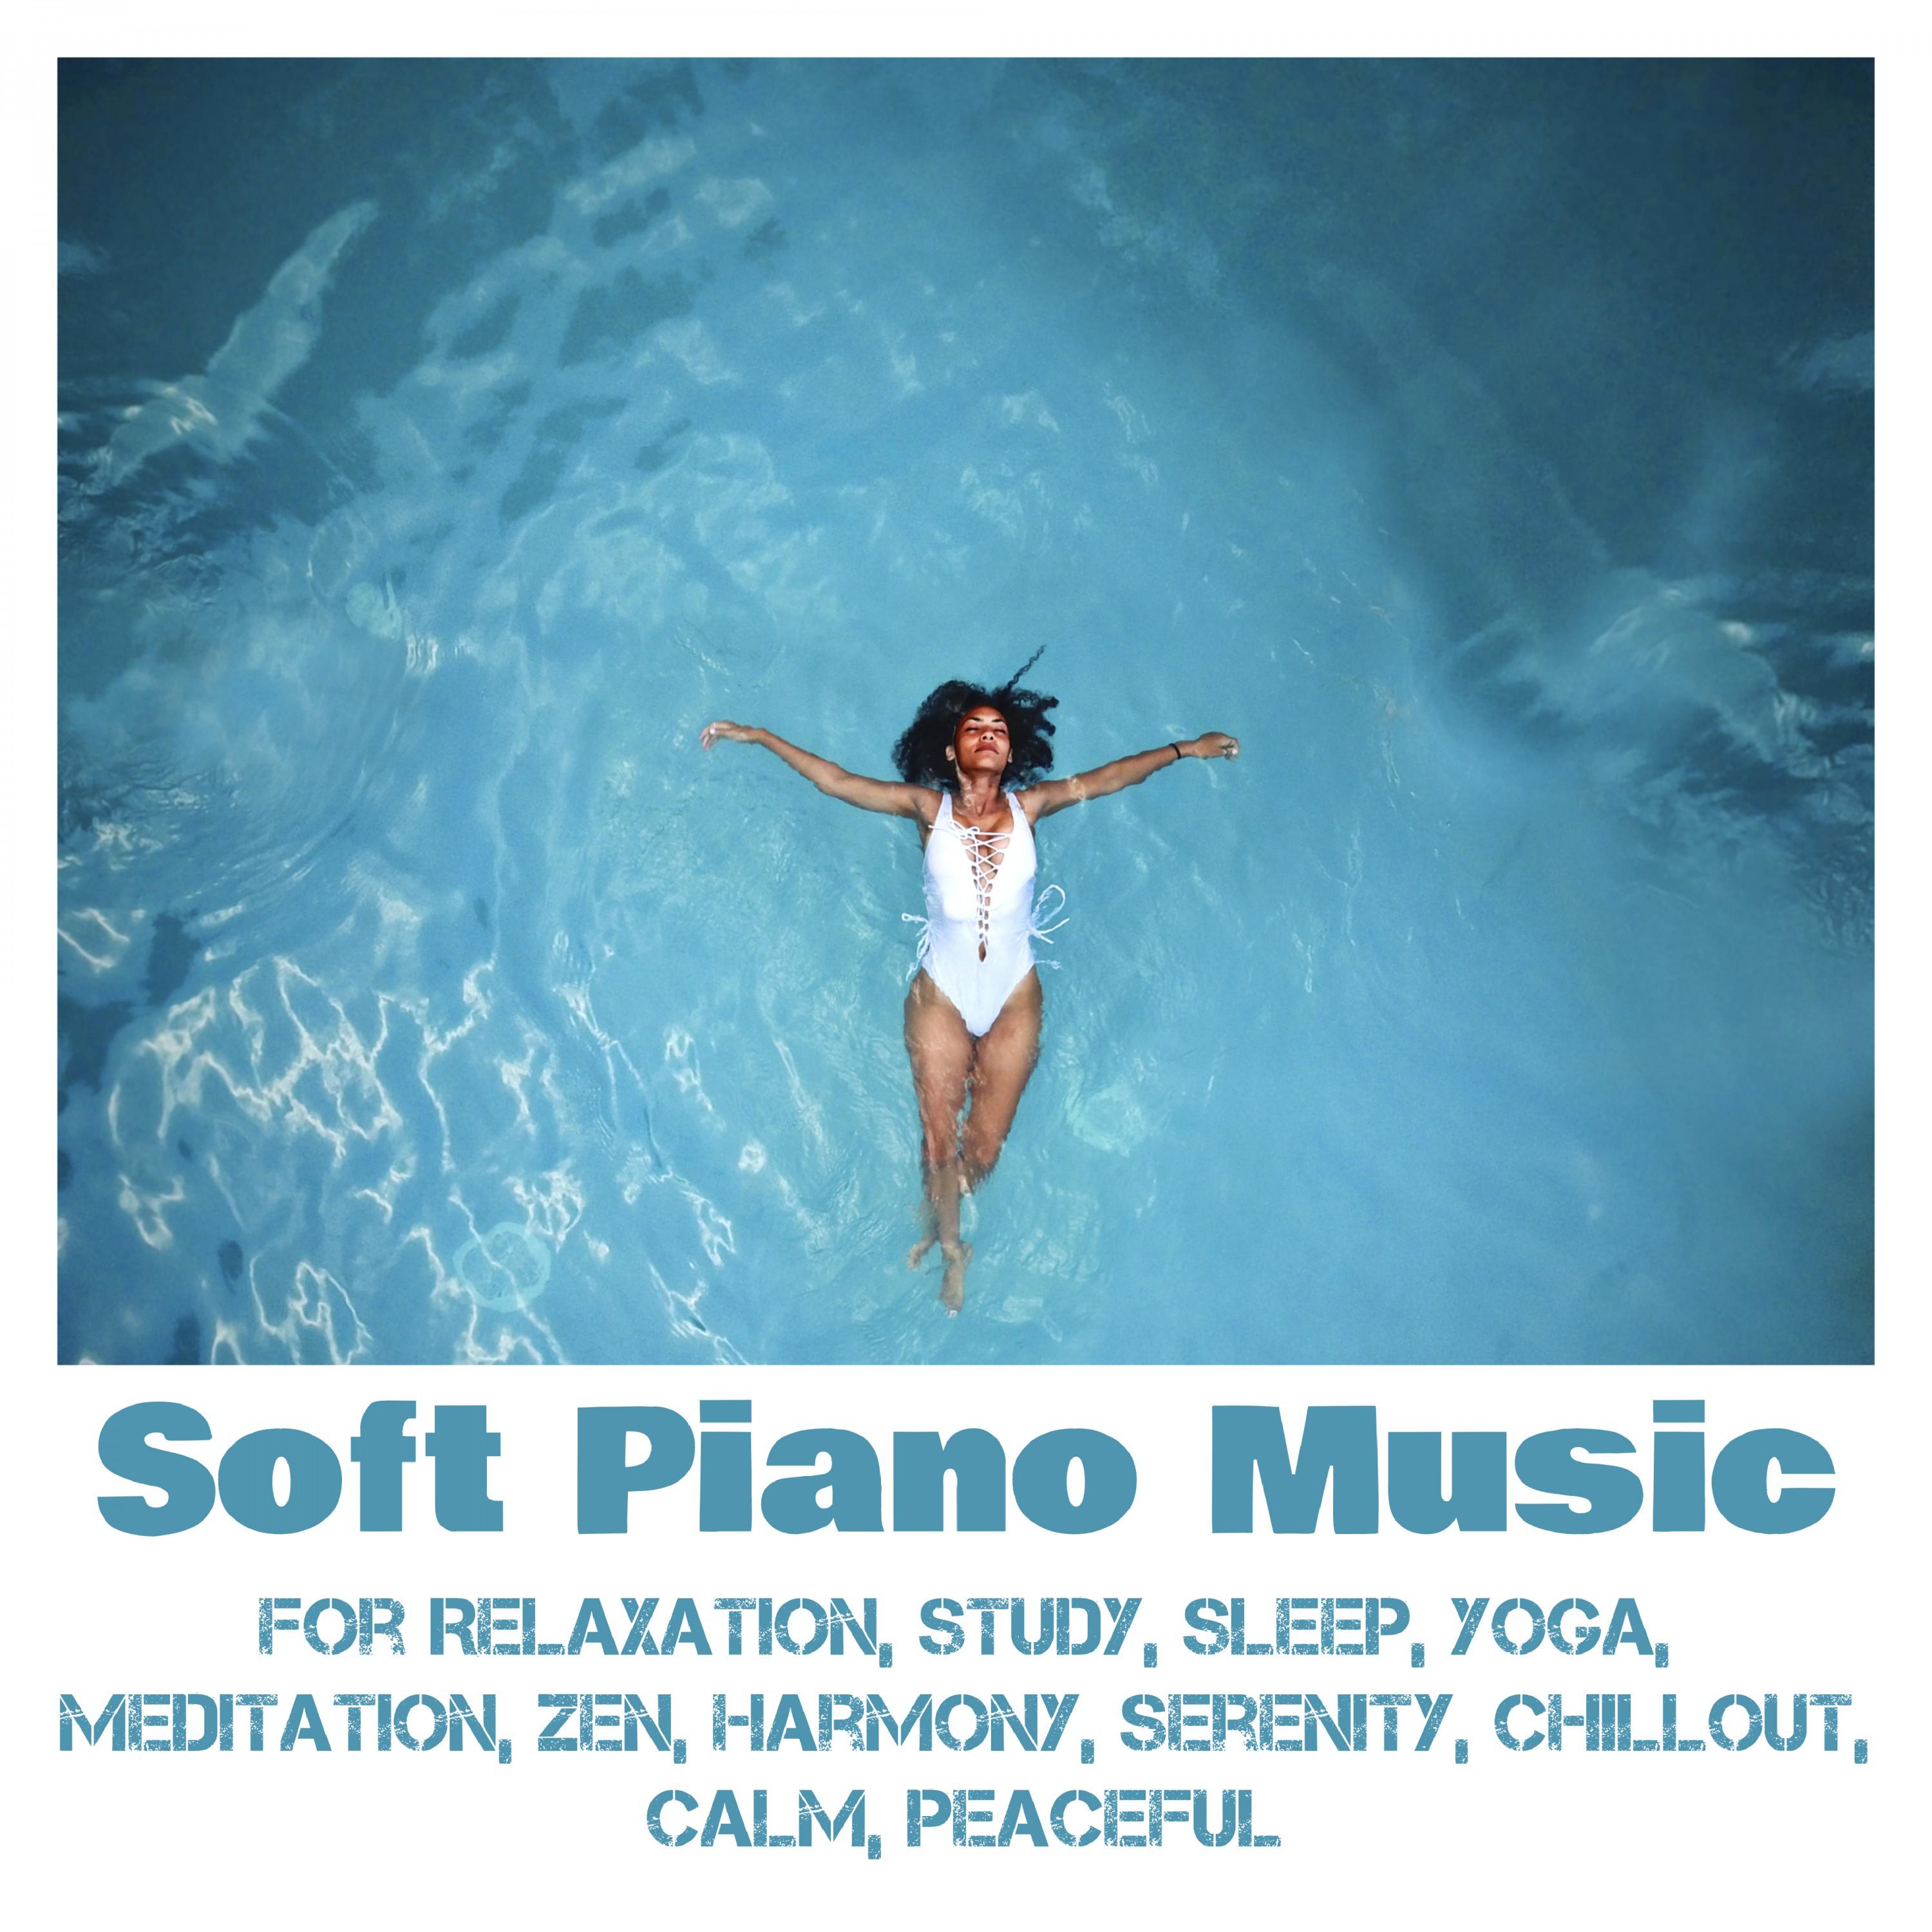 Soft Piano Music for Relaxation, Study, Sleep, Yoga, Meditation, Zen, Harmony, Serenity, Chillout, Calm, Peaceful